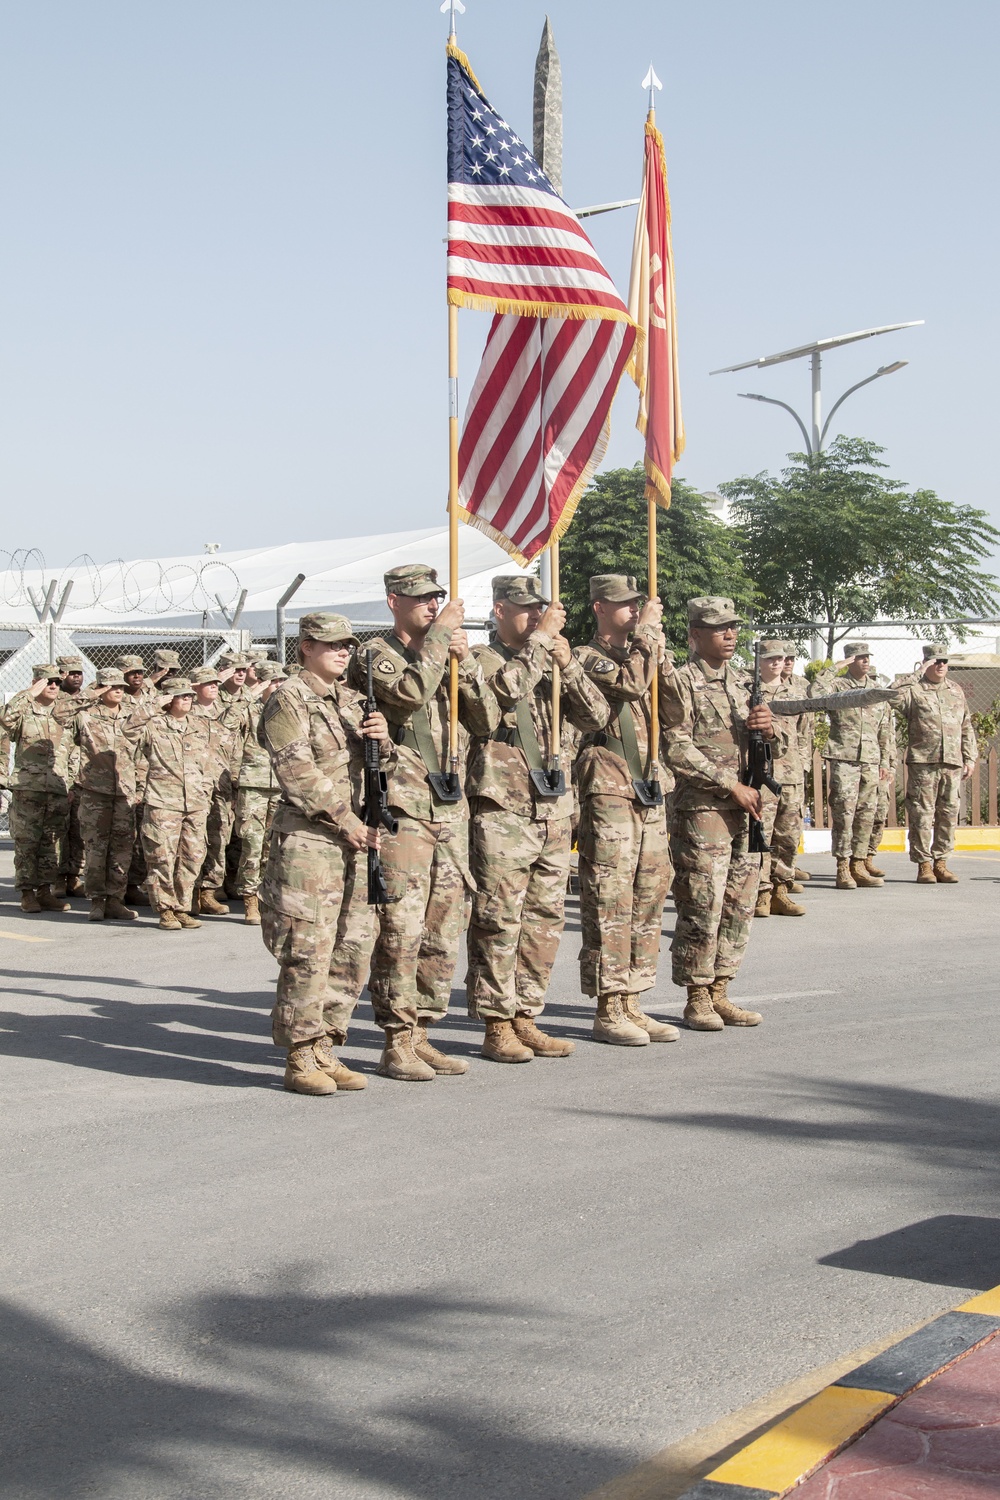 Change over, switch: Arizona National Guard hands off to Army Reserve